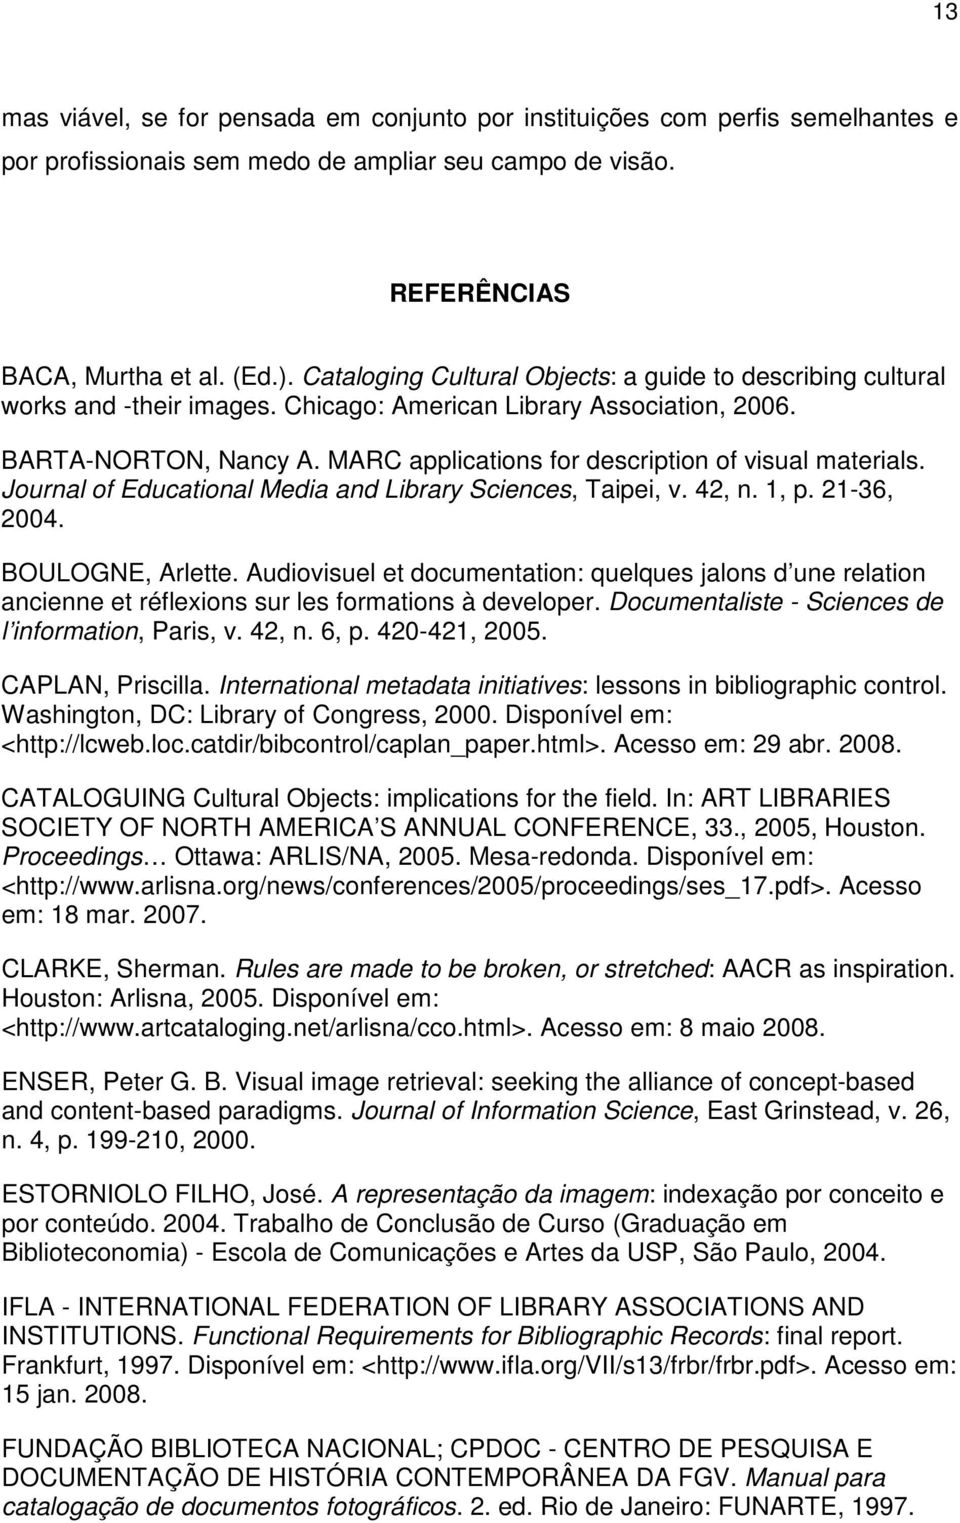 MARC applications for description of visual materials. Journal of Educational Media and Library Sciences, Taipei, v. 42, n. 1, p. 21-36, 2004. BOULOGNE, Arlette.